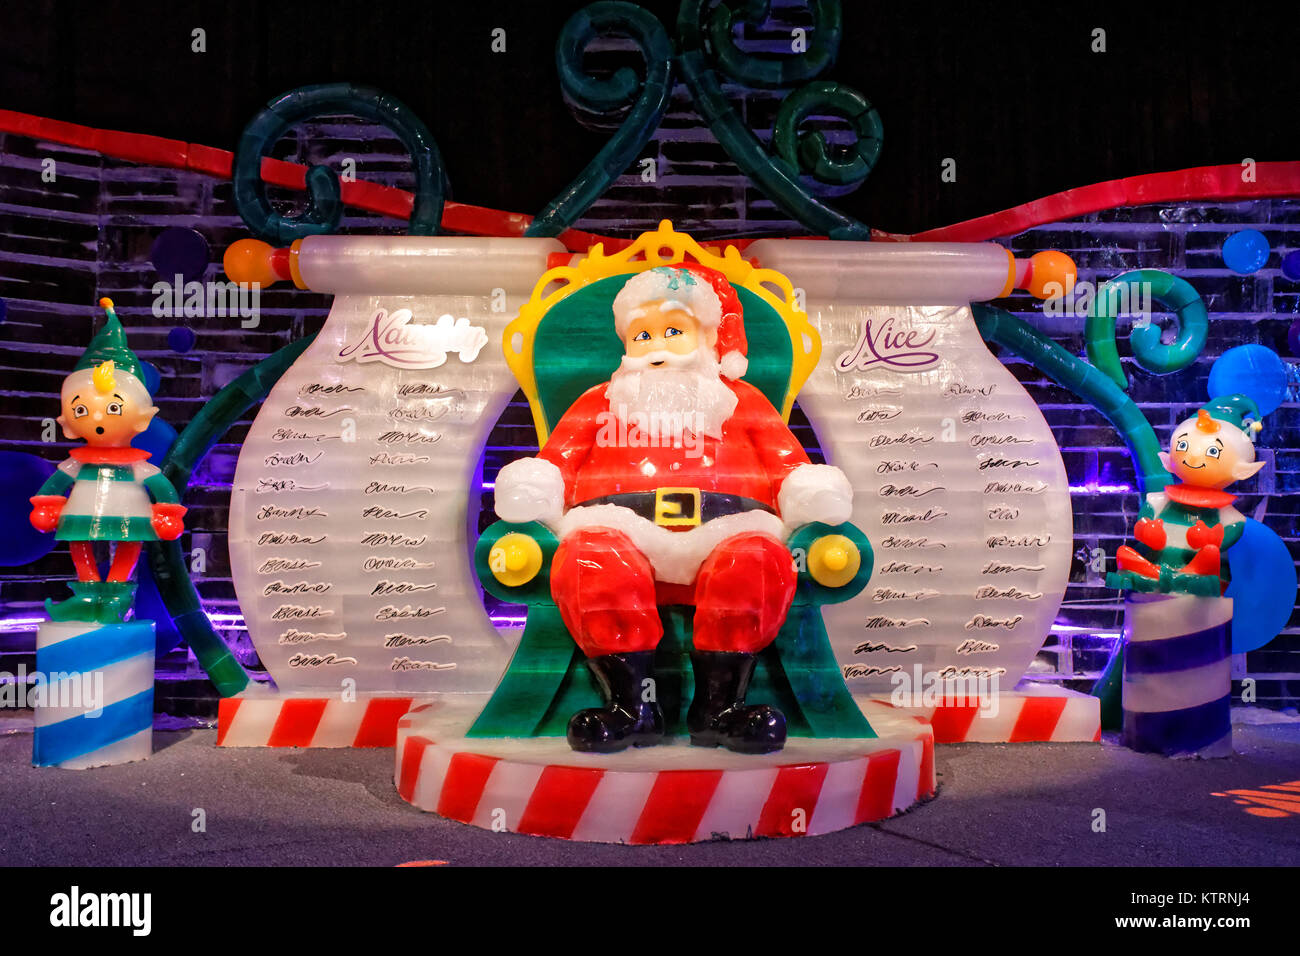 Ice sculptures at the ICE! Christmas Around the World event, Gaylord Palm resort, Orlando Florida Stock Photo